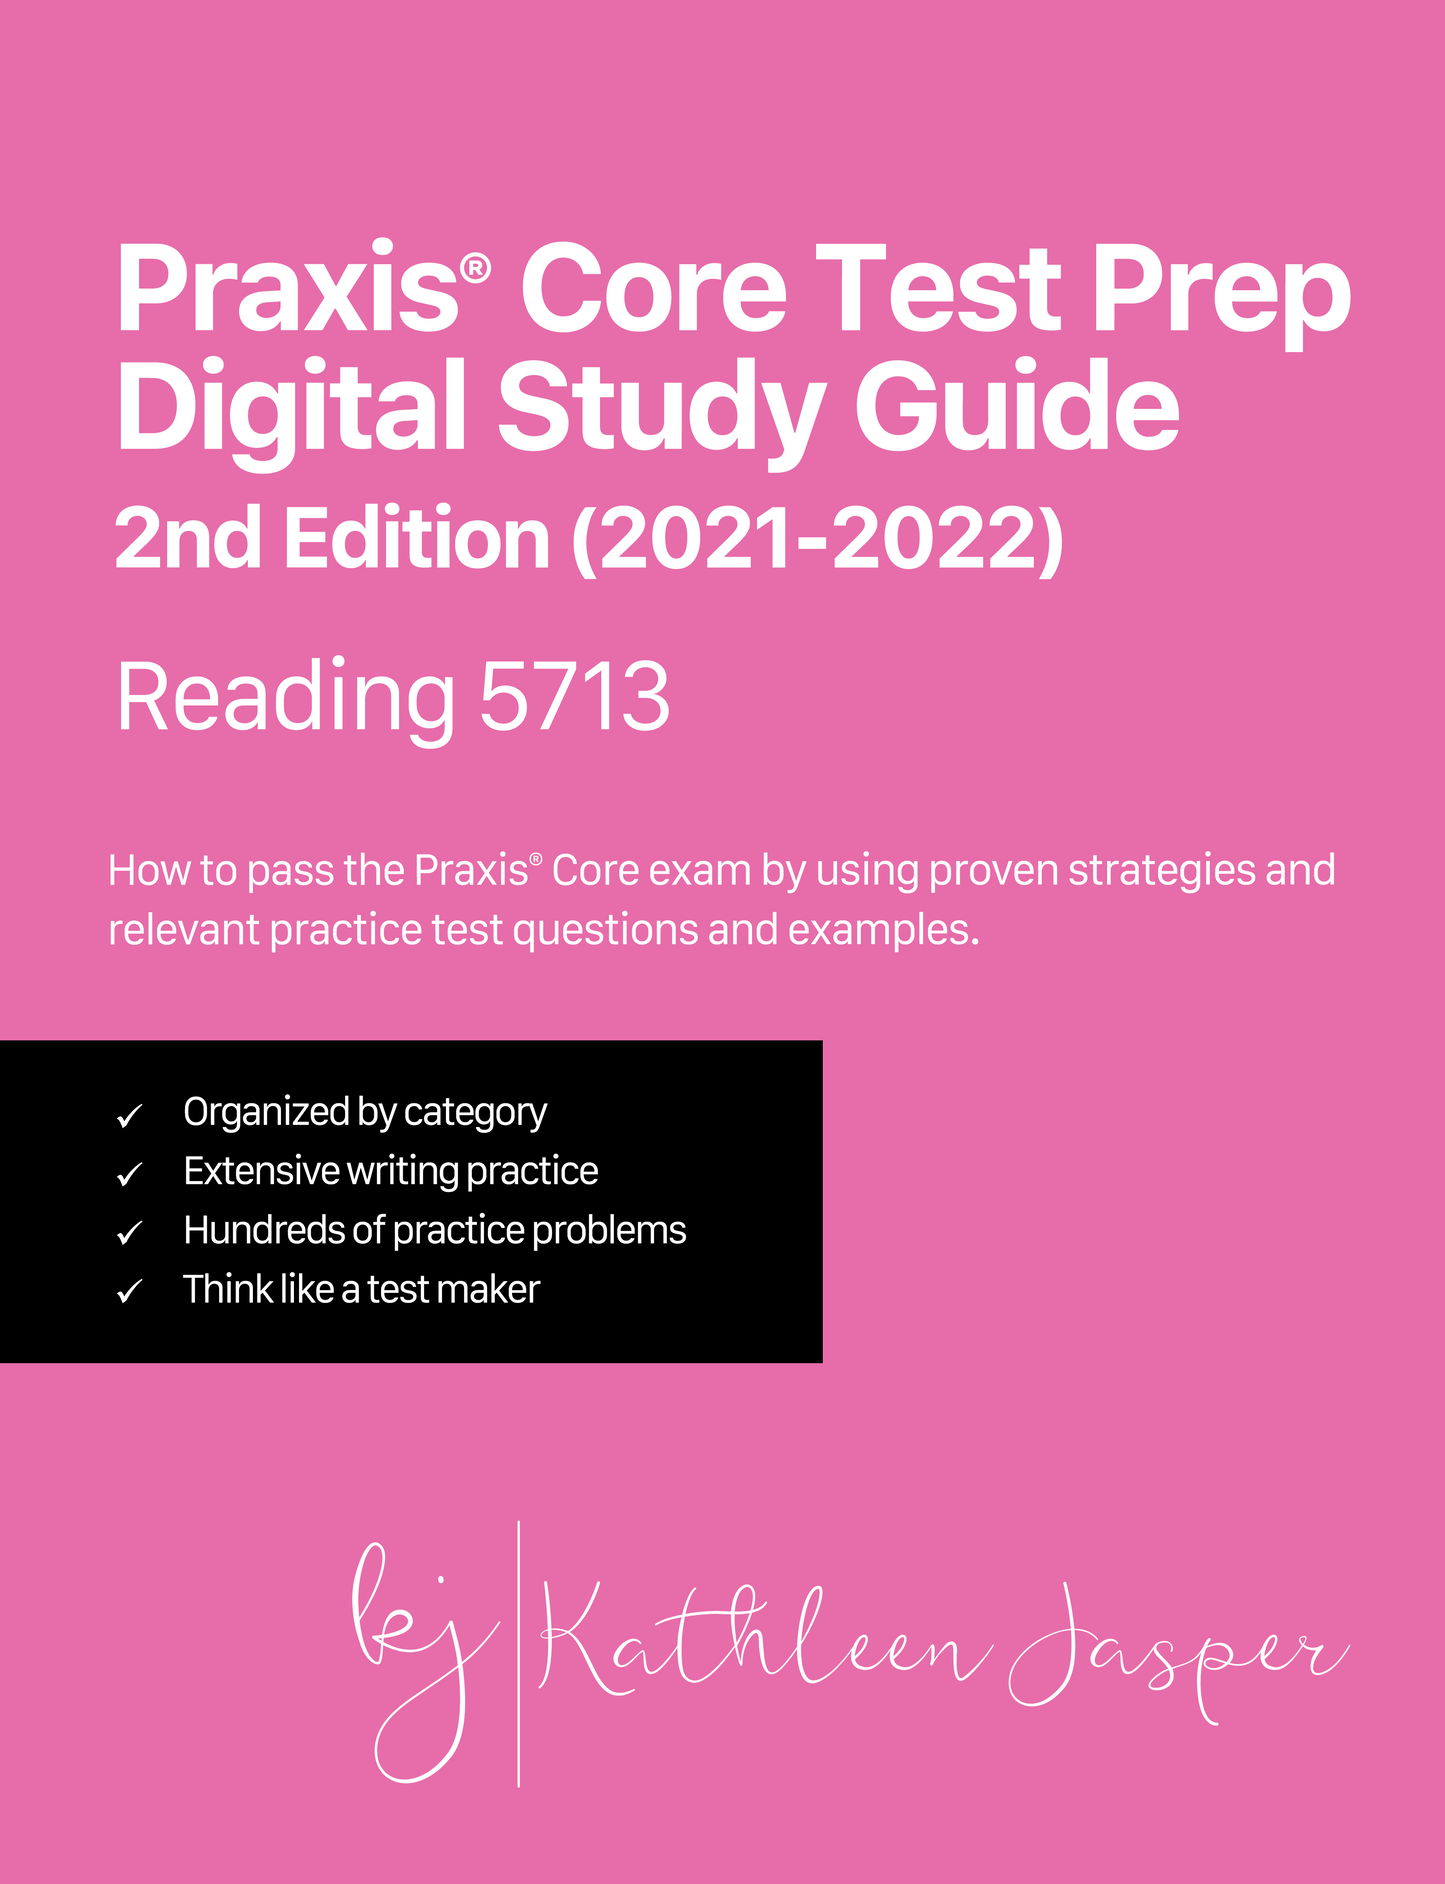 Praxis Core 2nd Edition - Digital Study Guides and Practice Tests